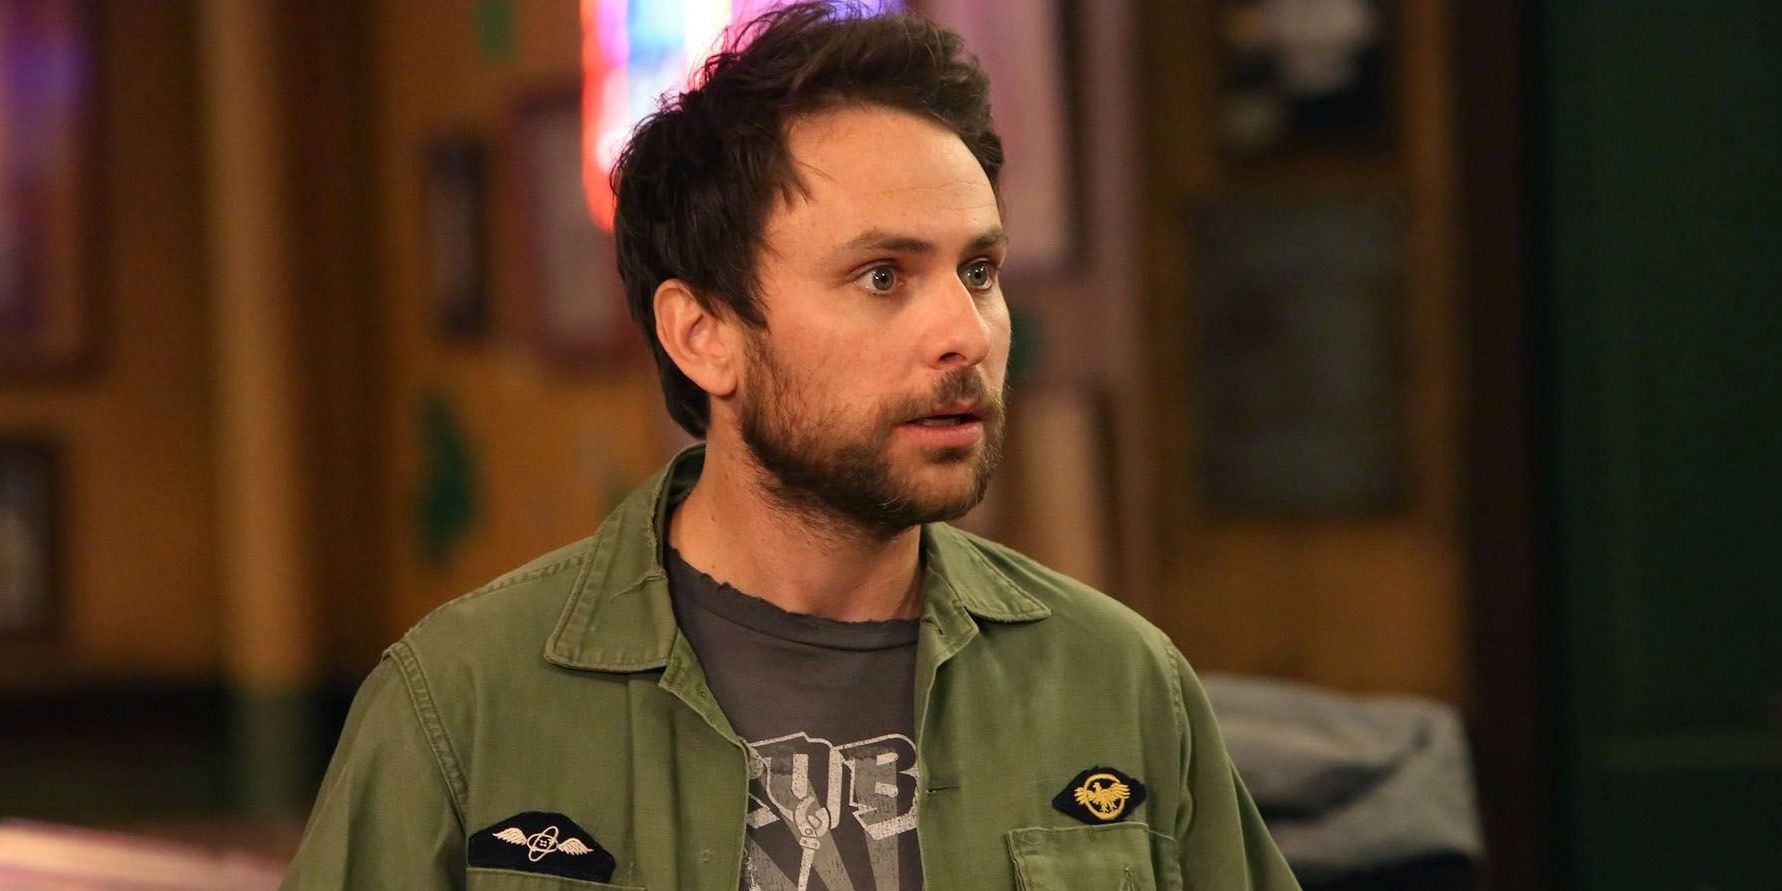 Charlie Kelly on Dating